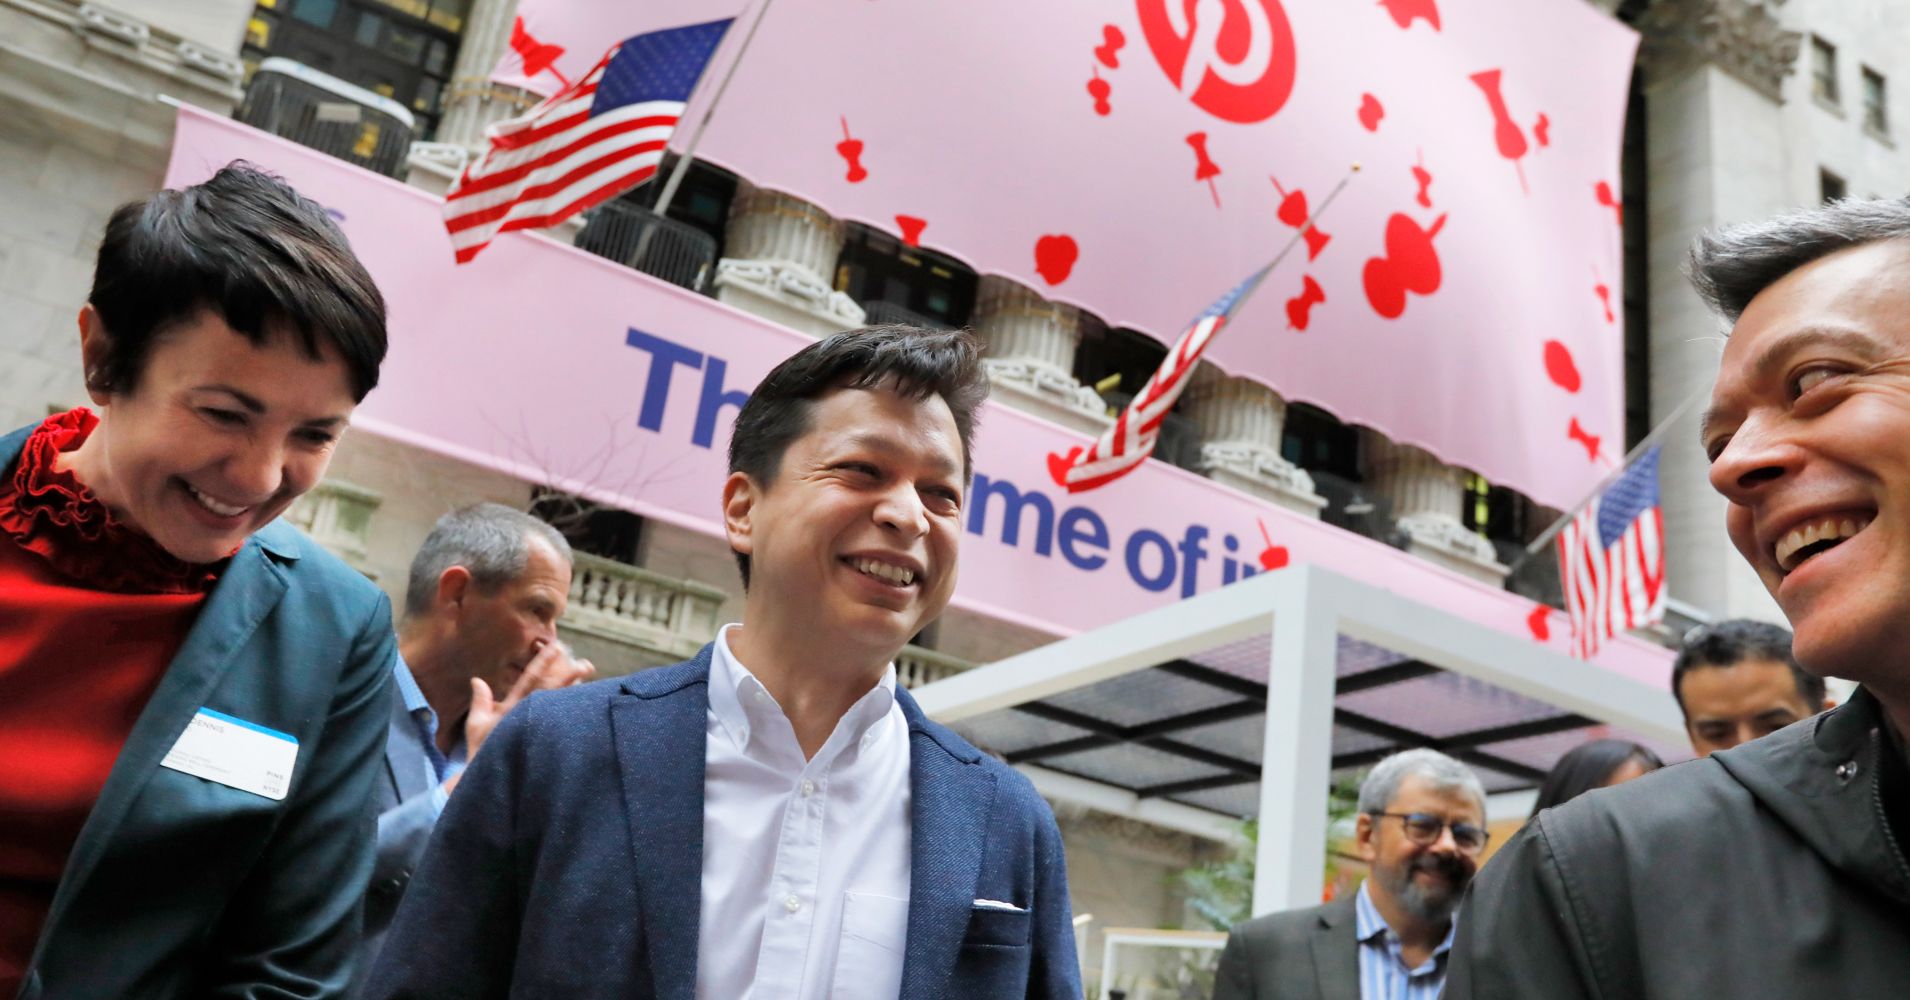 Pinterest co-founder & CEO Ben Silbermann, center, gathers with company employees outside the New York Stock Exchange, Thursday, April 18, 2019, before the Pinterest IPO.